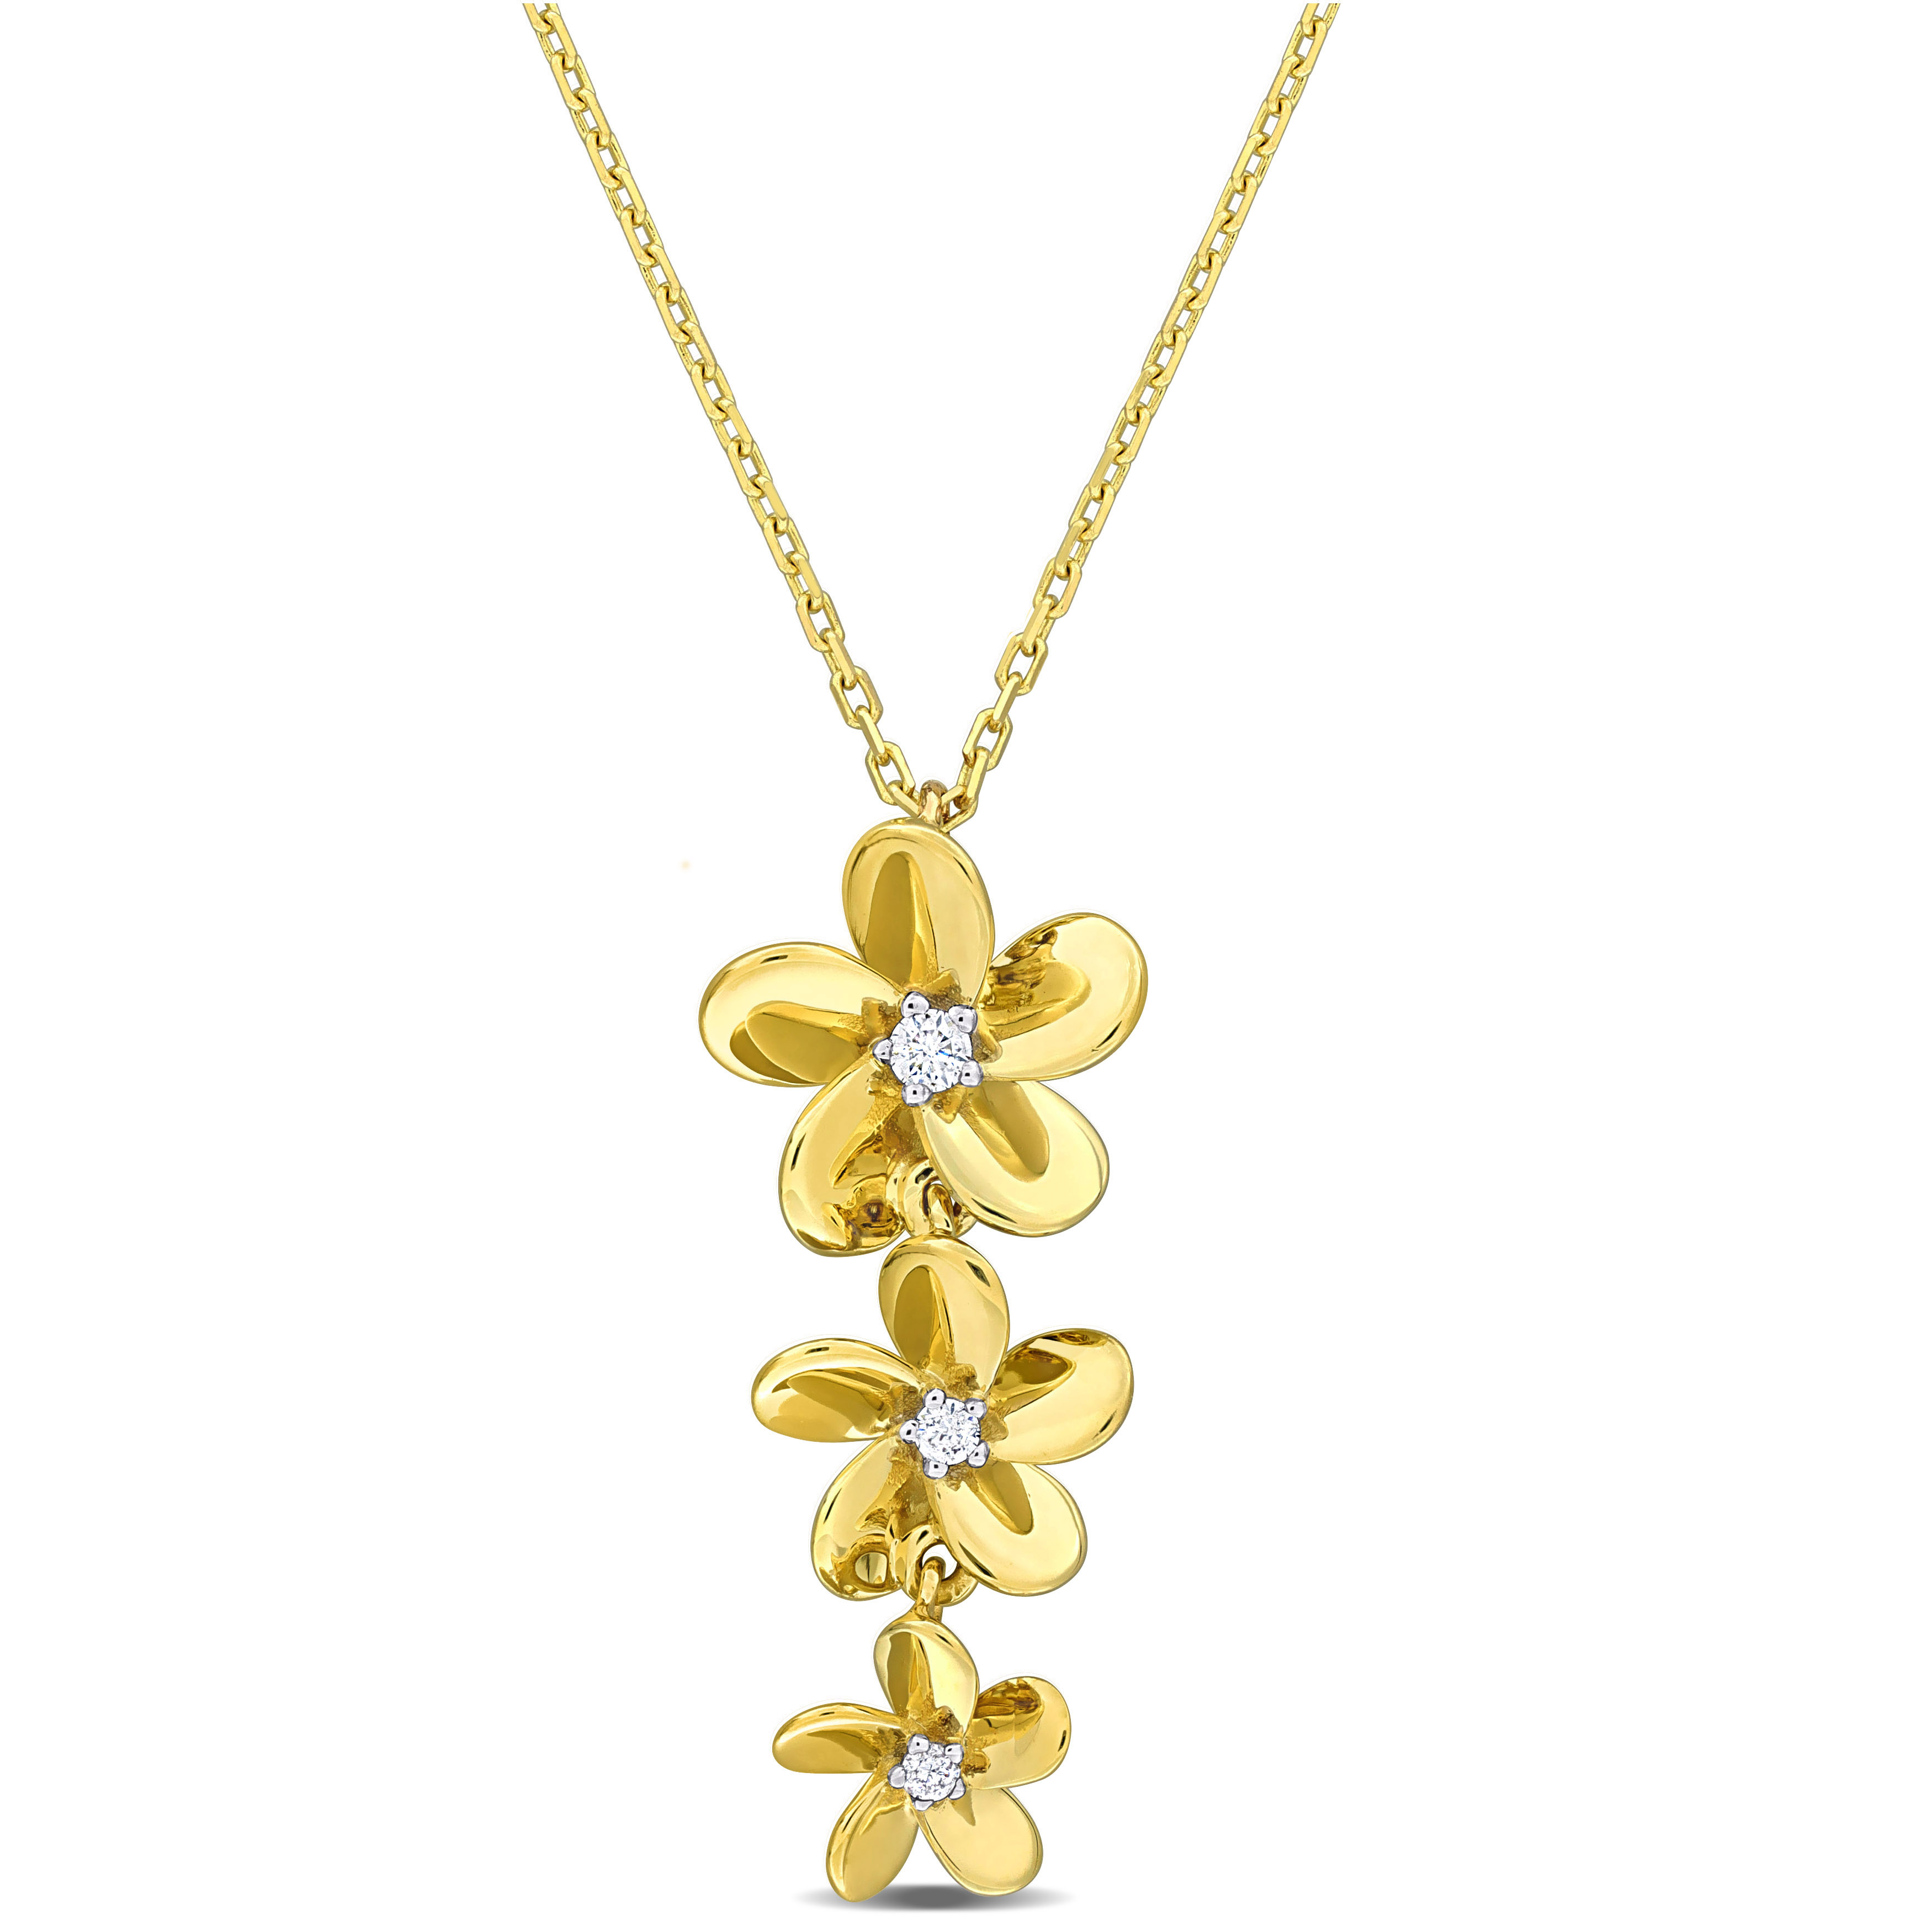 Diamond Accent Floral Pendant with Chain Necklace in 10k Yellow Gold - 17 in